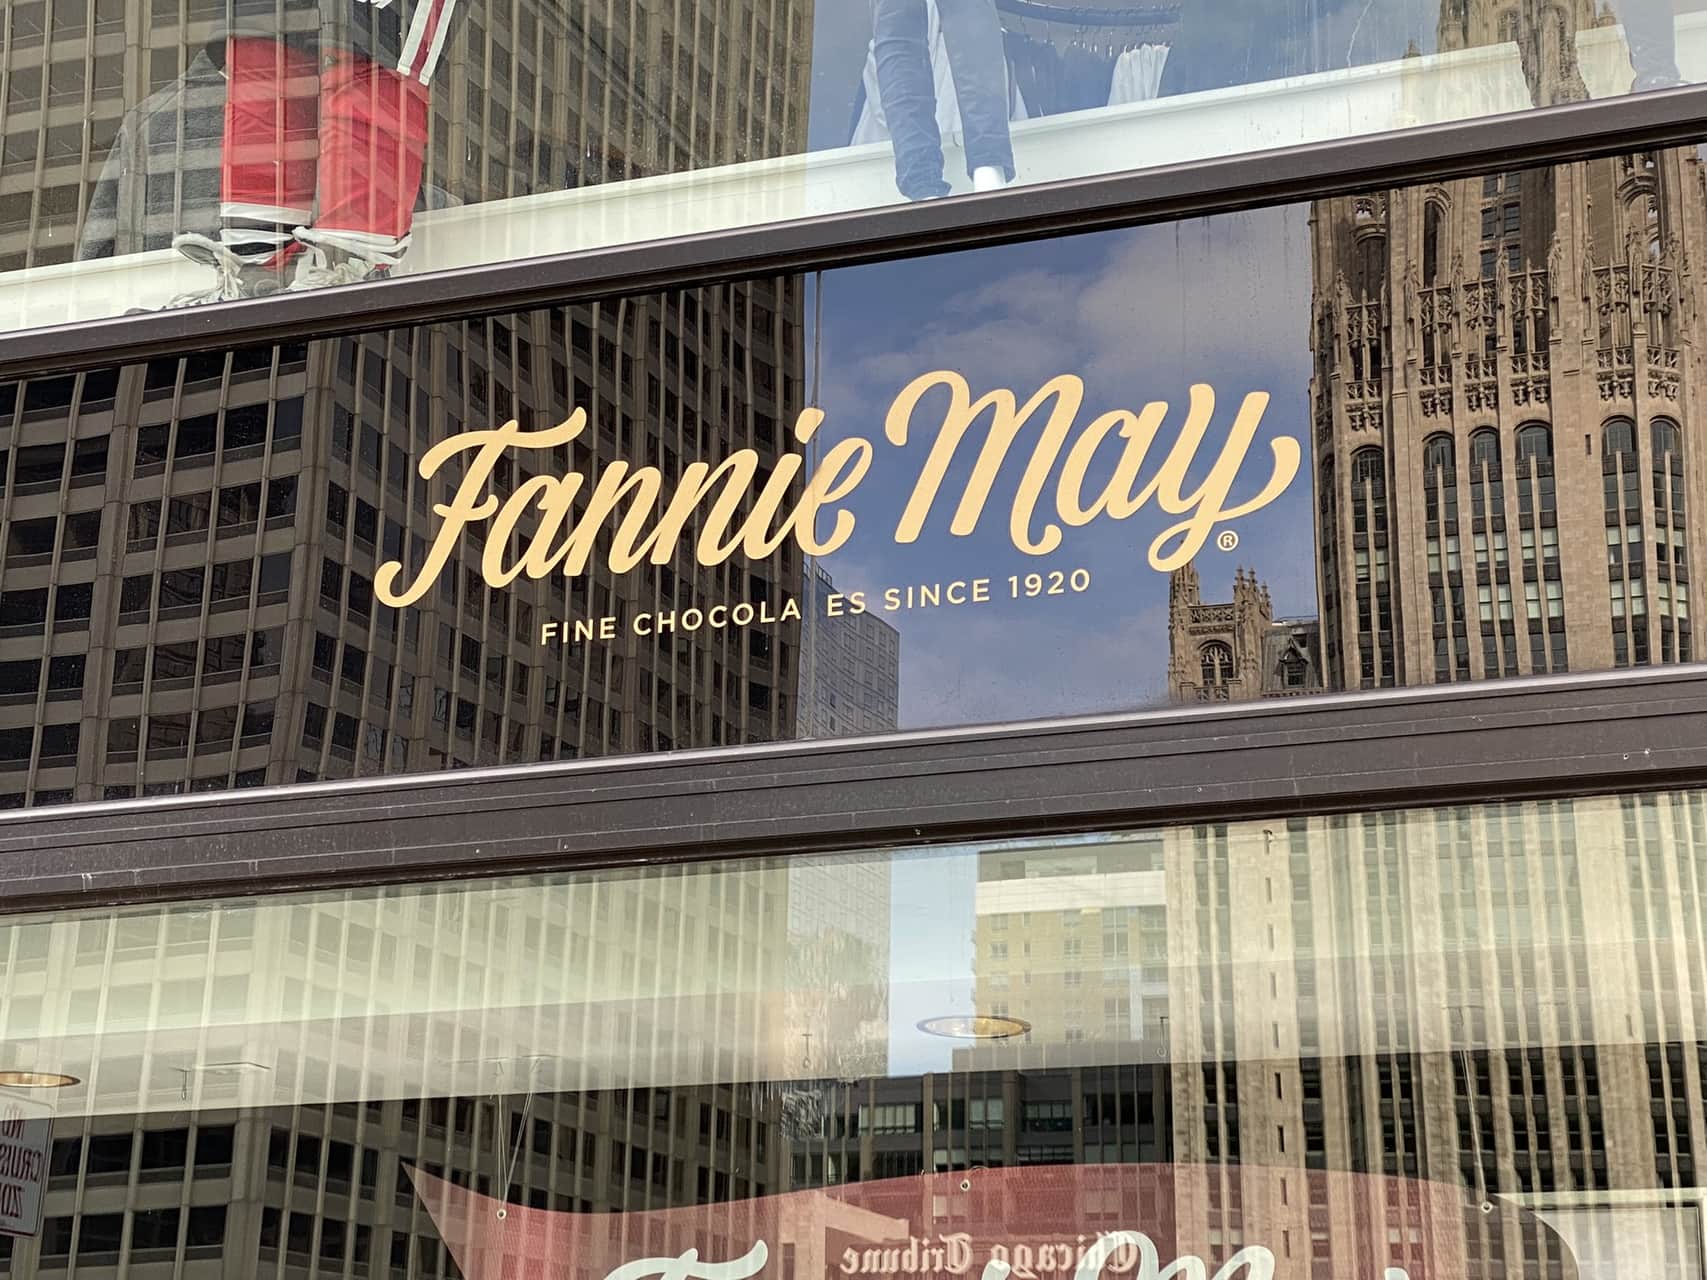 Fanny May Chocolates on the Chicago Food Tour